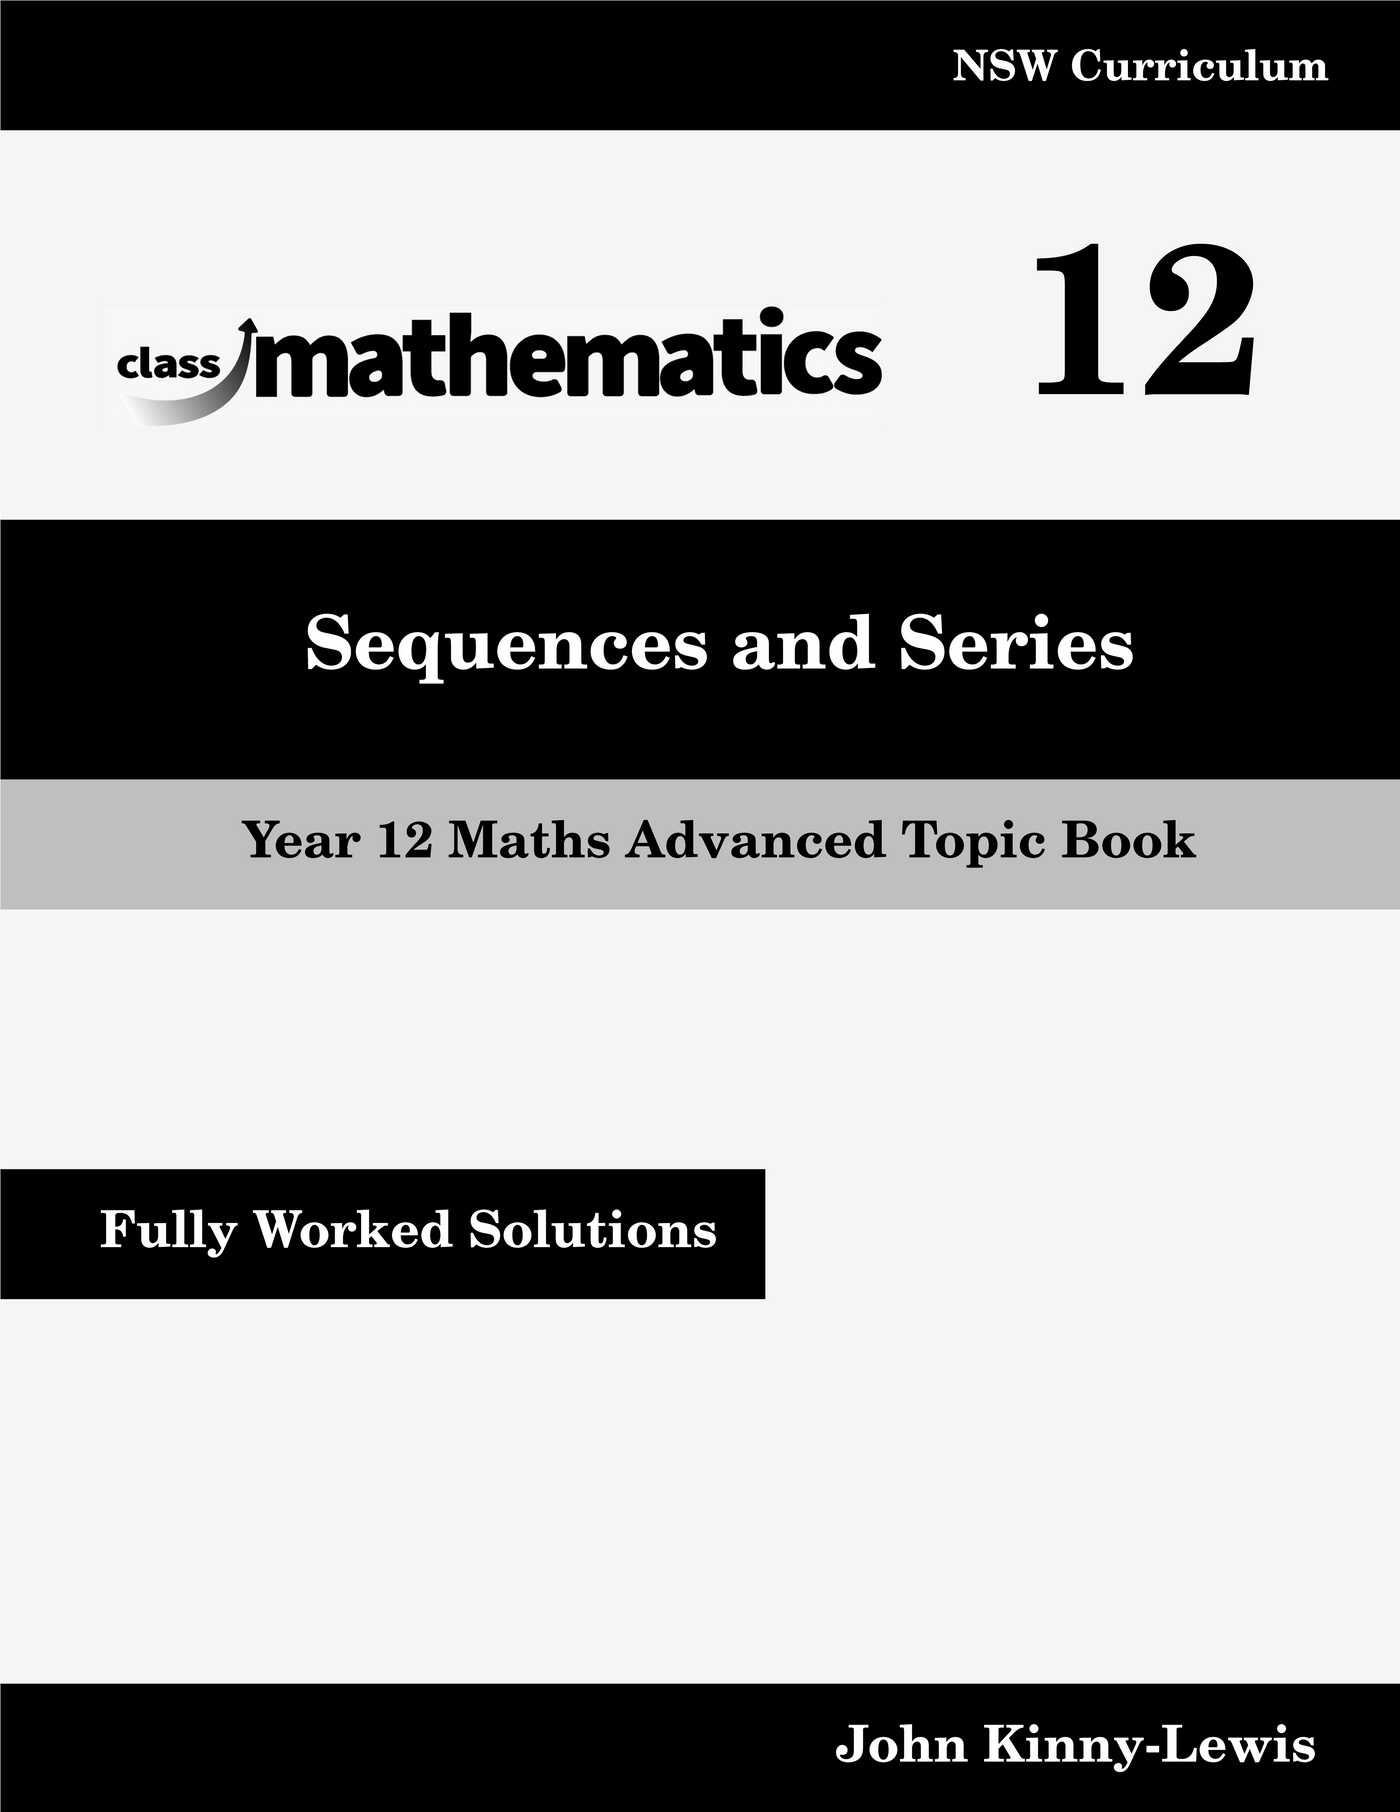 NSW Year 12 Maths Advanced - Sequences and Series